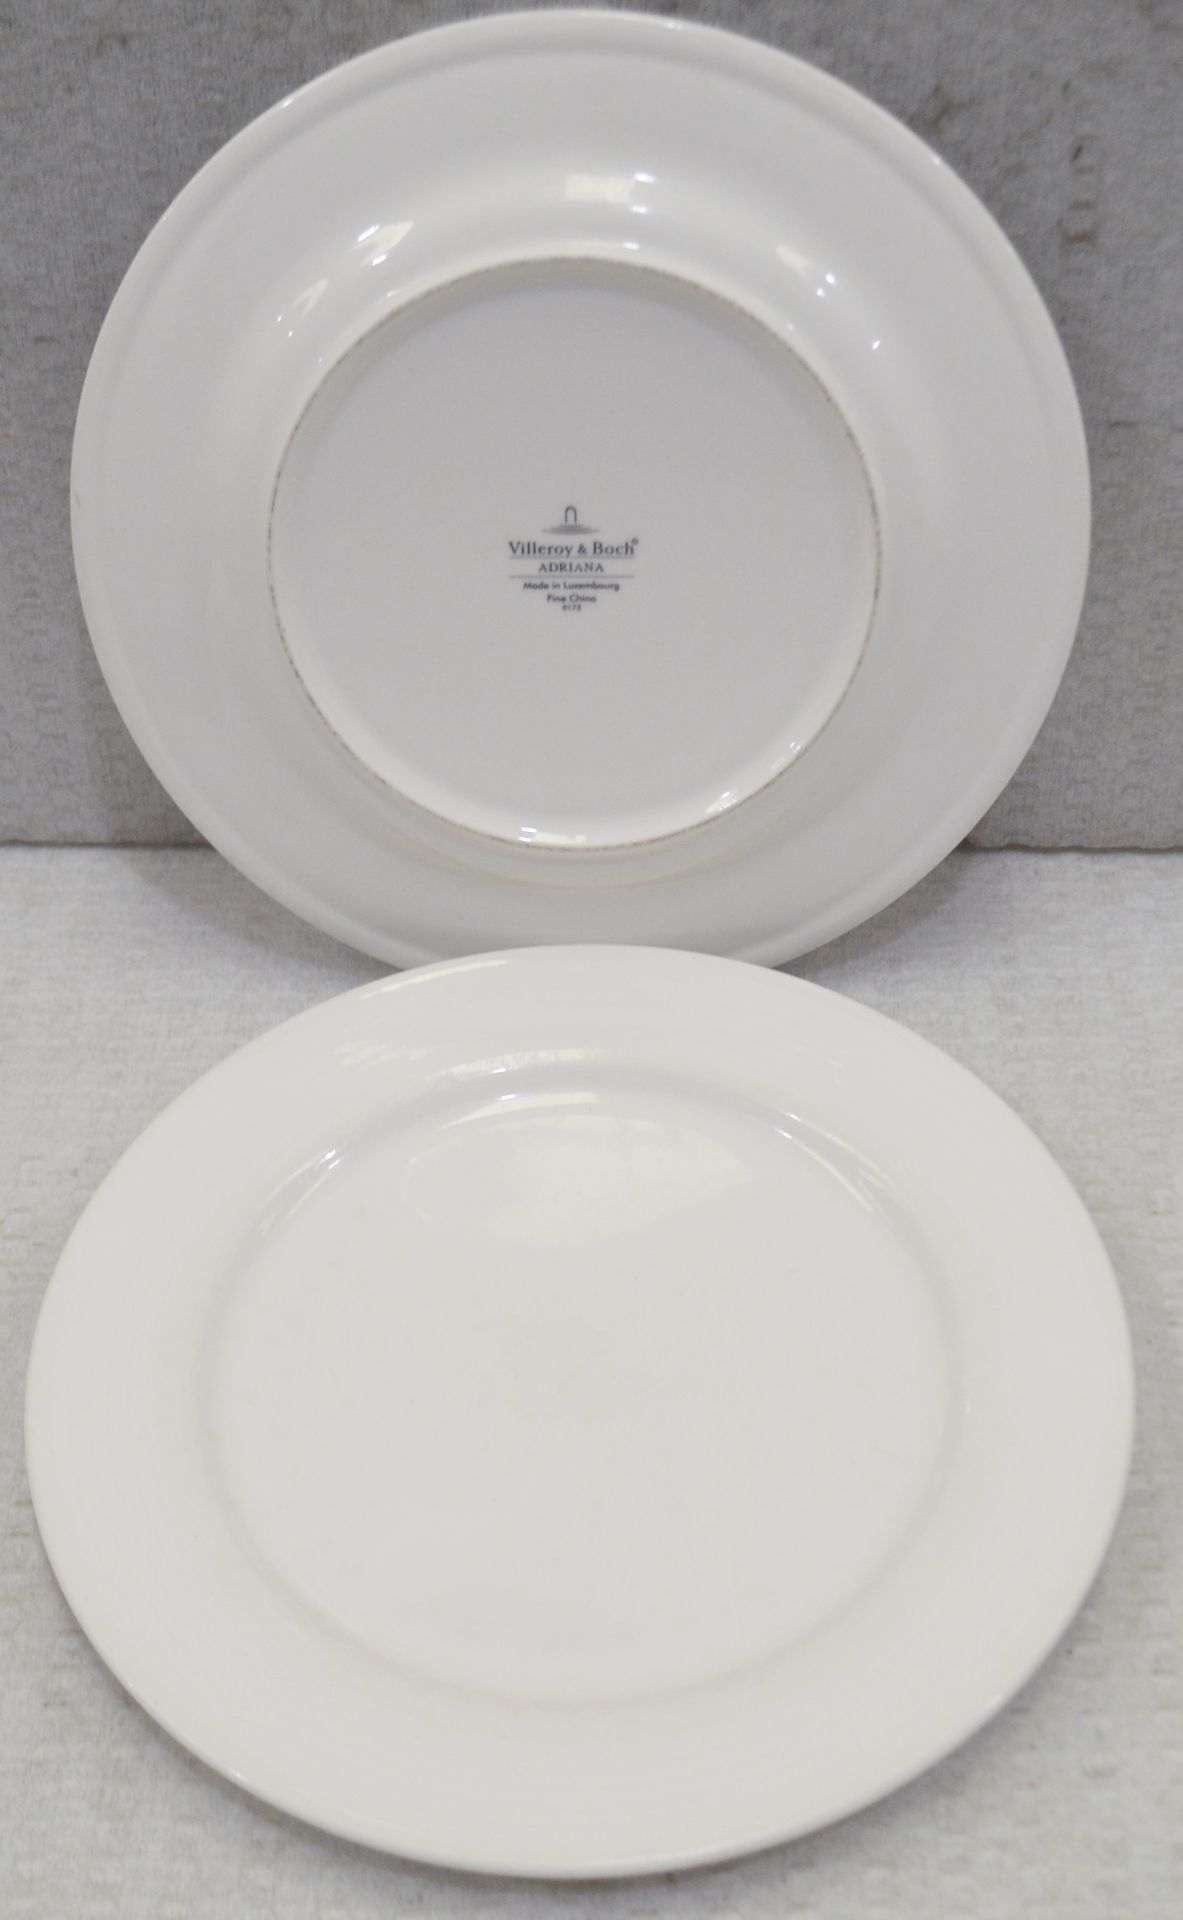 54 x Villeroy & Boch Dinner Plates - Dimensions: 27cm – Recently Removed From a Commercial - Image 2 of 3